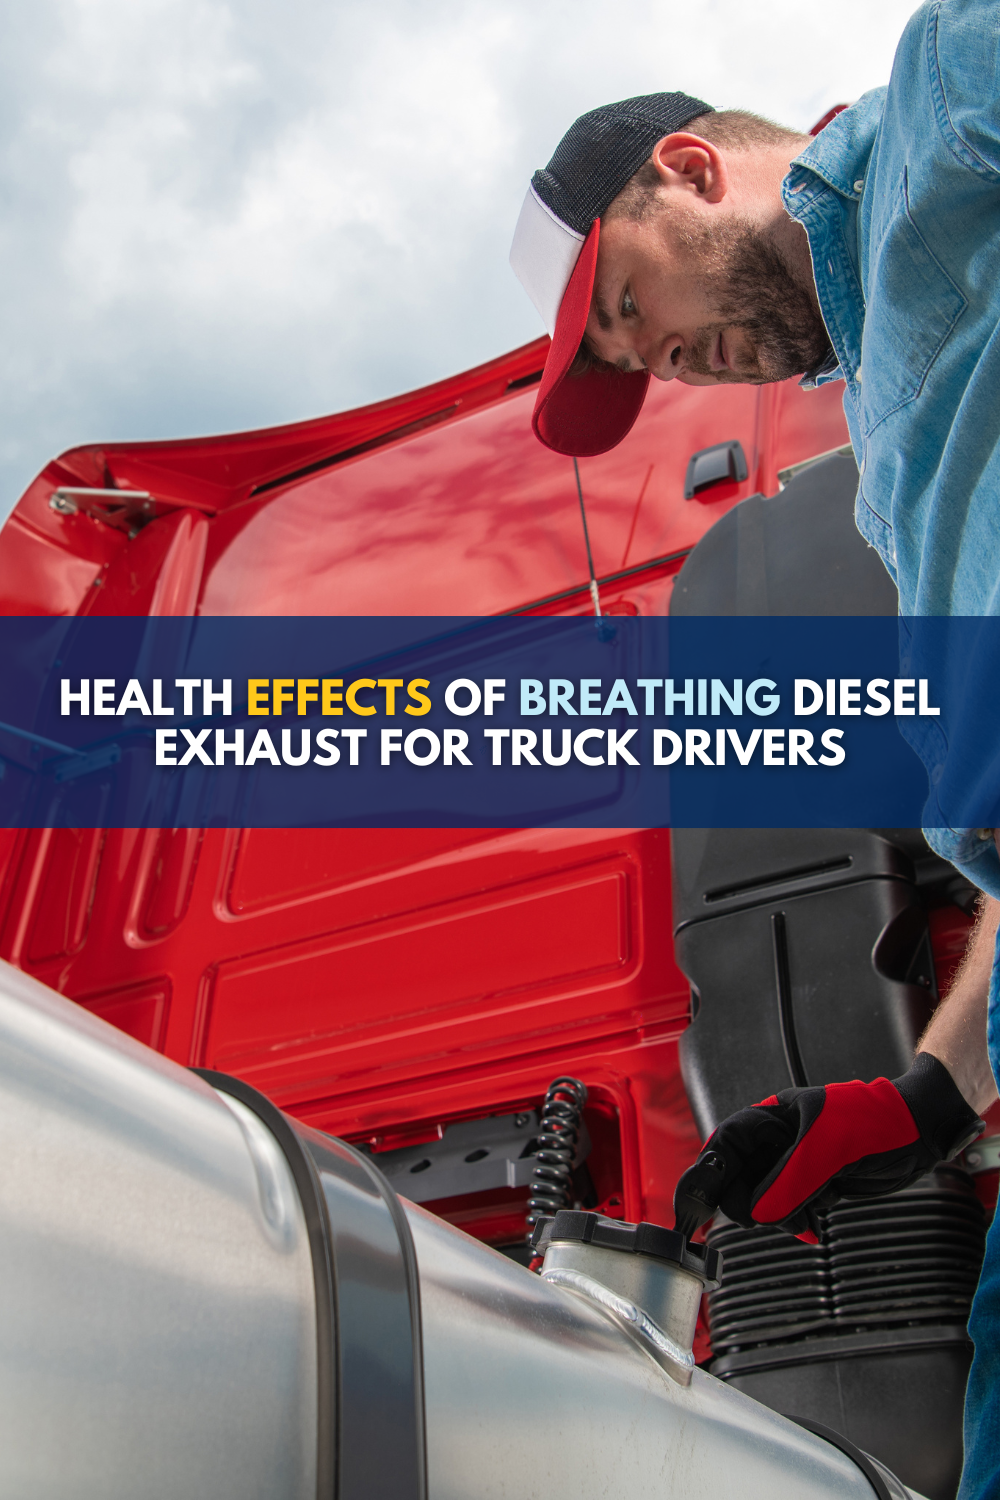 Effects of Breathing Diesel Exhaust on Truckers: What You Need To Know